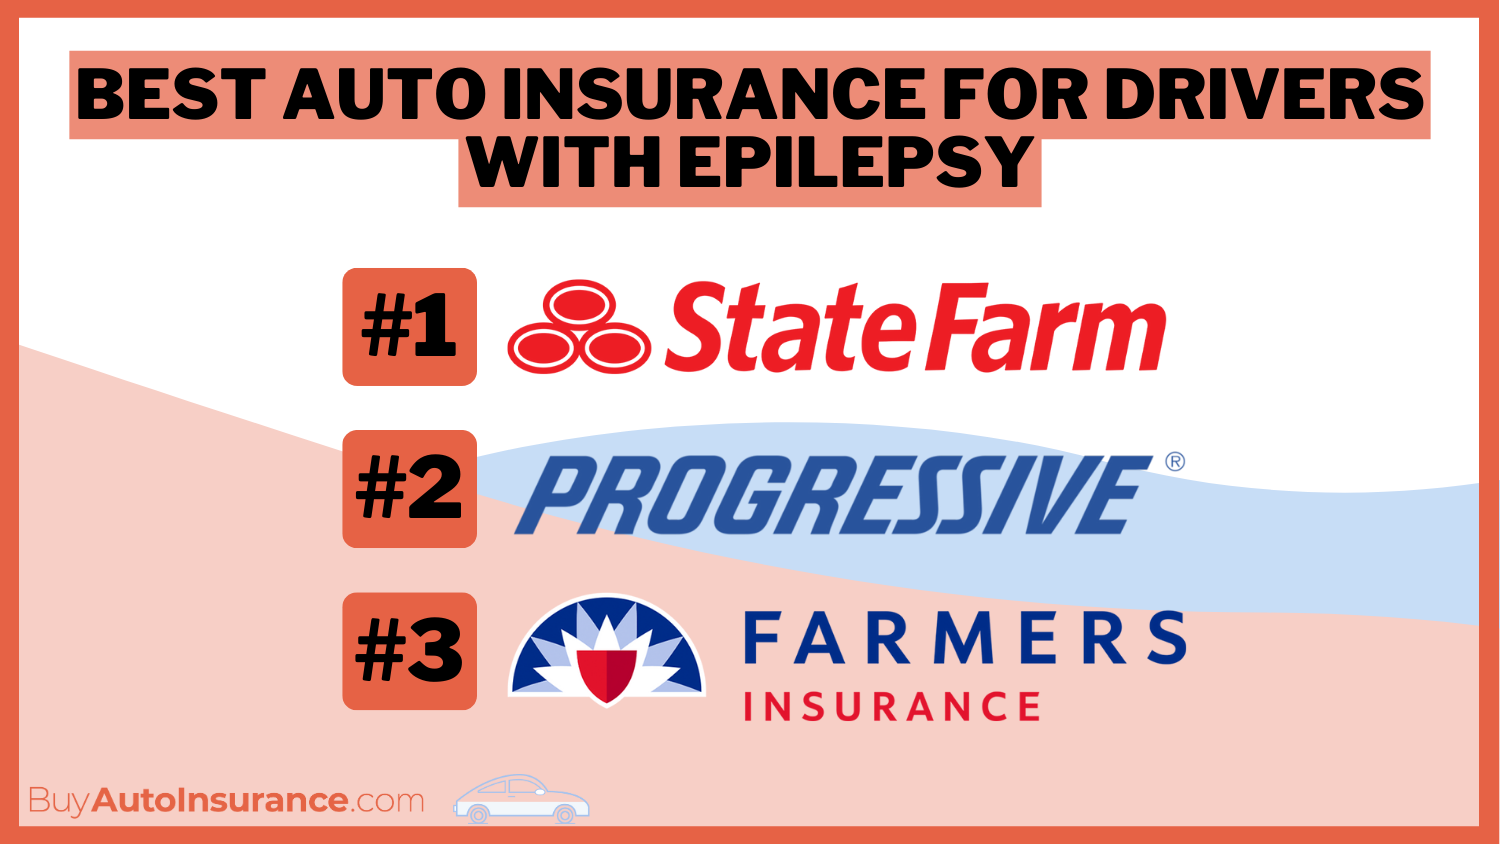 Best Auto Insurance for Drivers With Epilepsy: State Farm, Progressive, and Farmers.